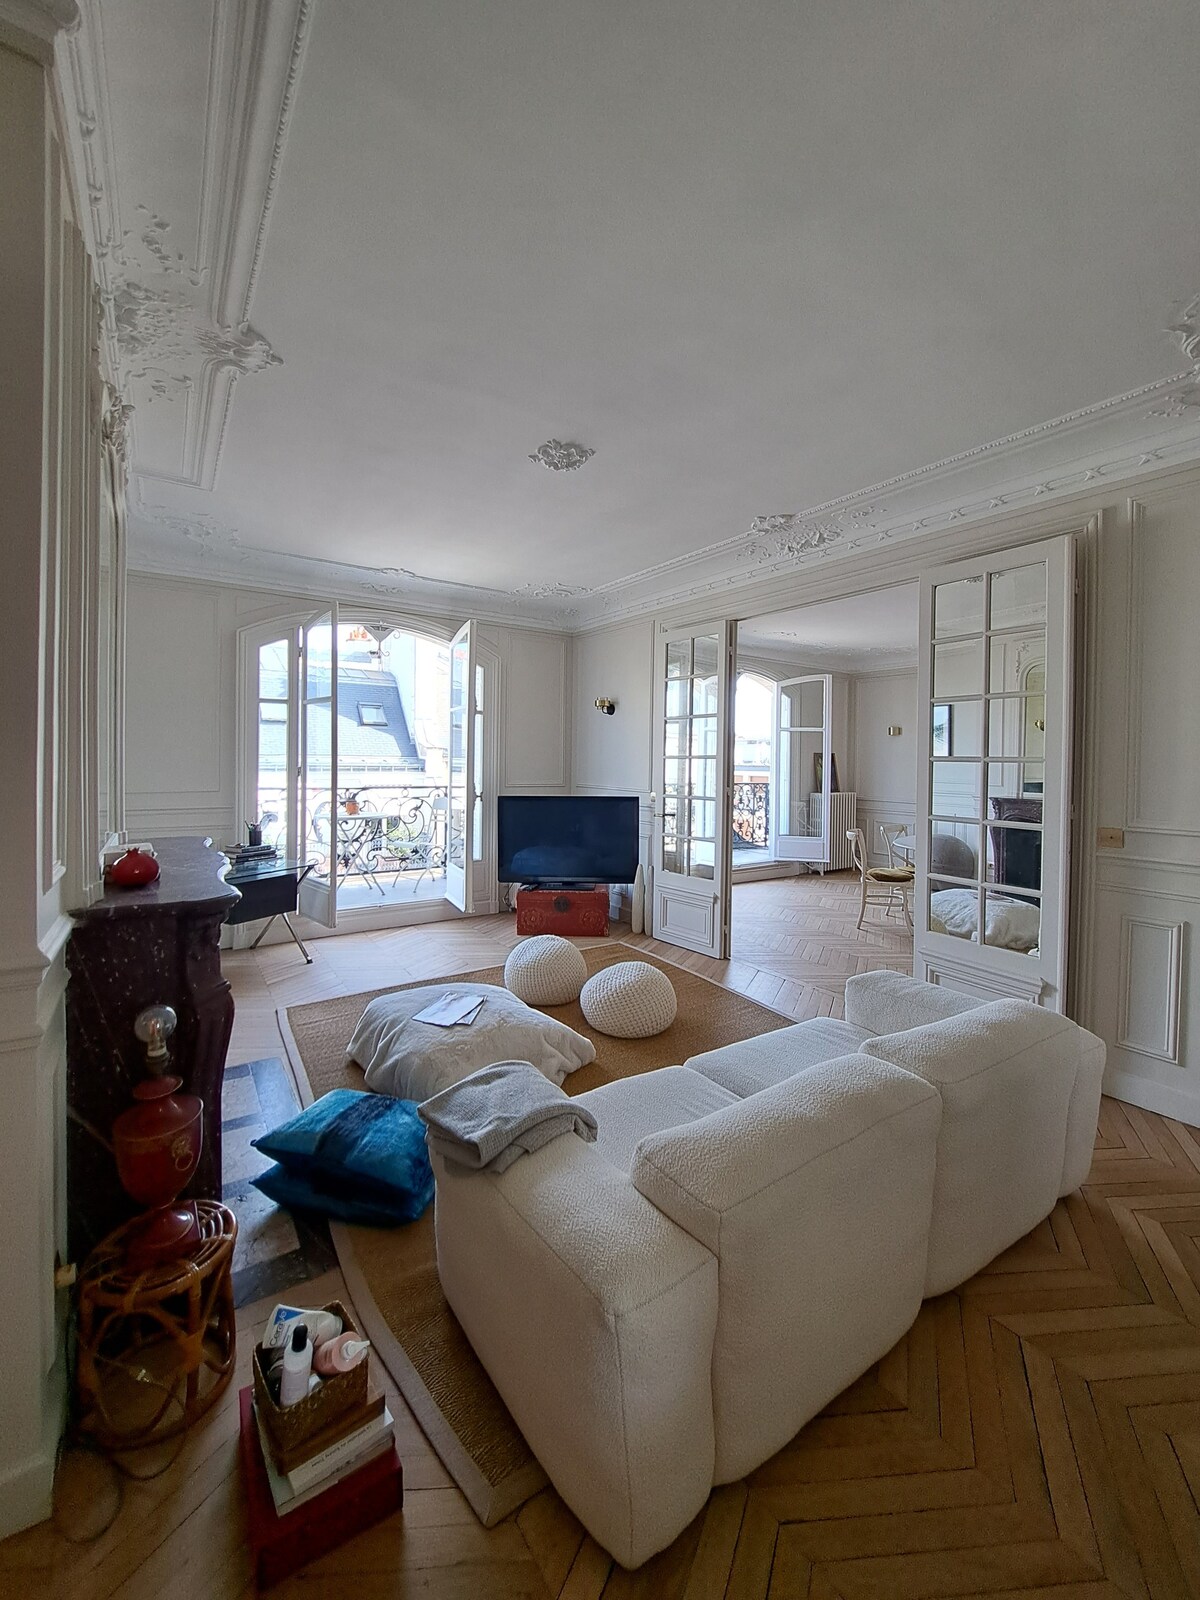 Parisian flat with balconies, A/C in 2 bedroom